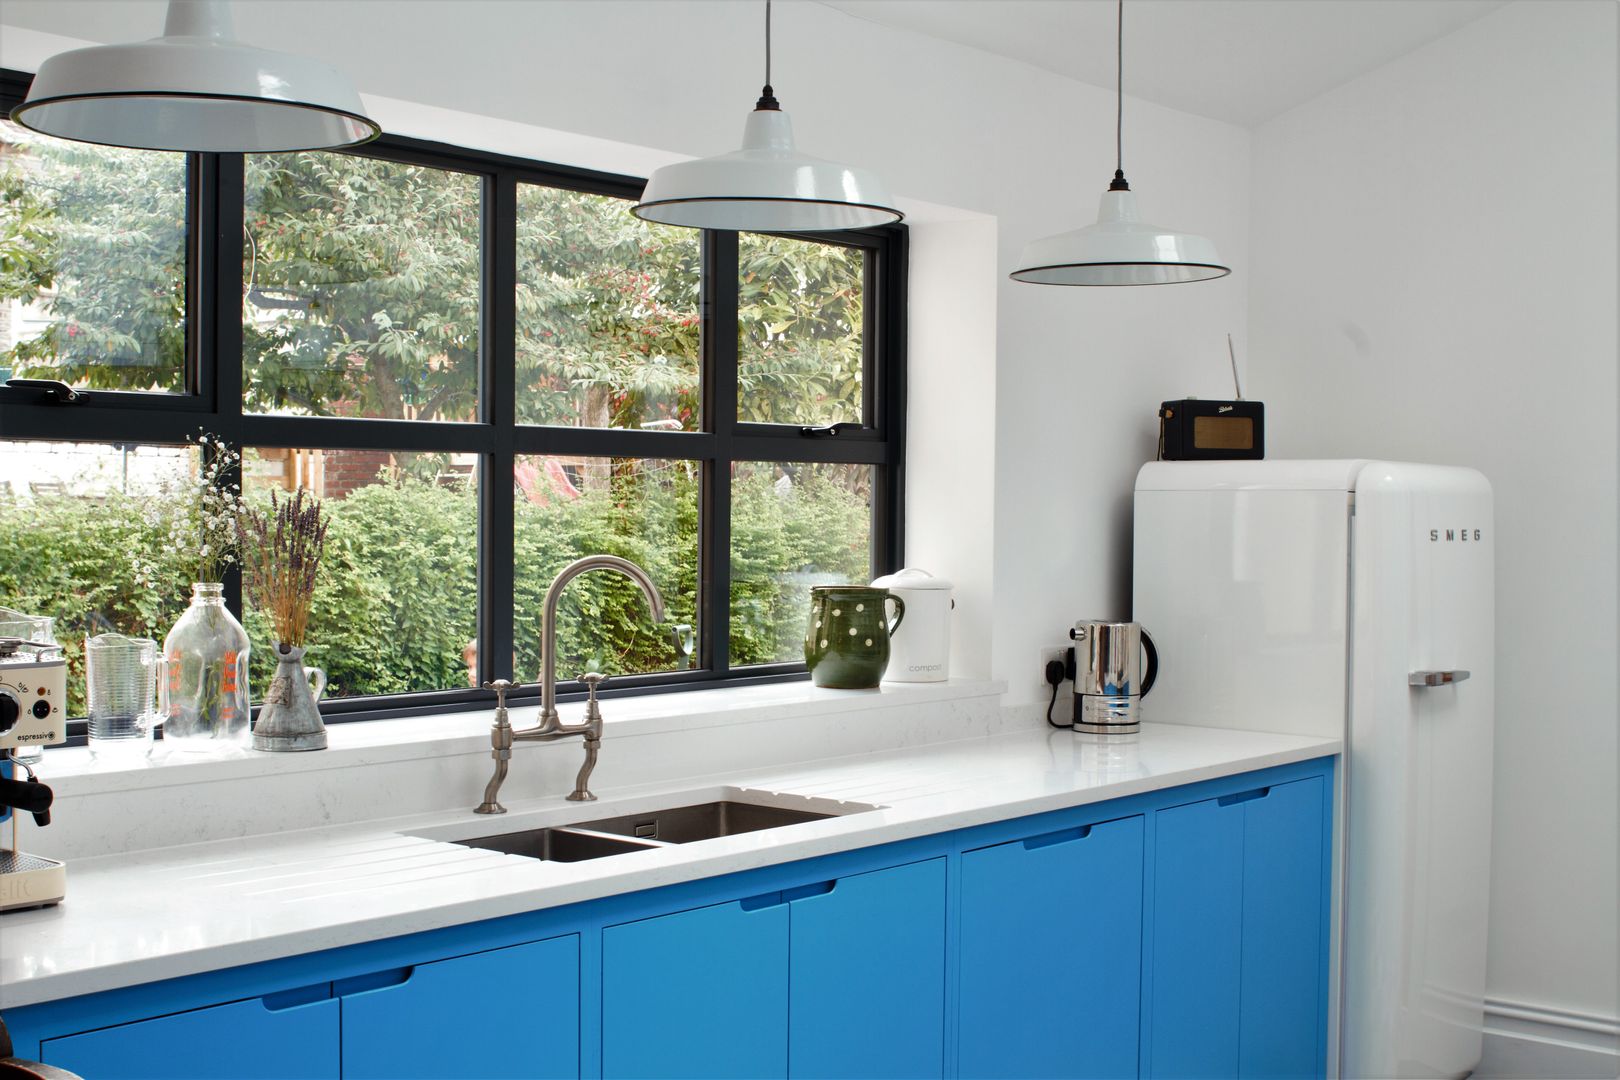 Industrial Kitchen With American Diner Feel homify مطبخ خشب نقي Multicolored flat panel,farrow & ball,st giles blue,bianco venato,smeg fridge,monobloc tap,clearwater stereo,windows,pendant light,industrial